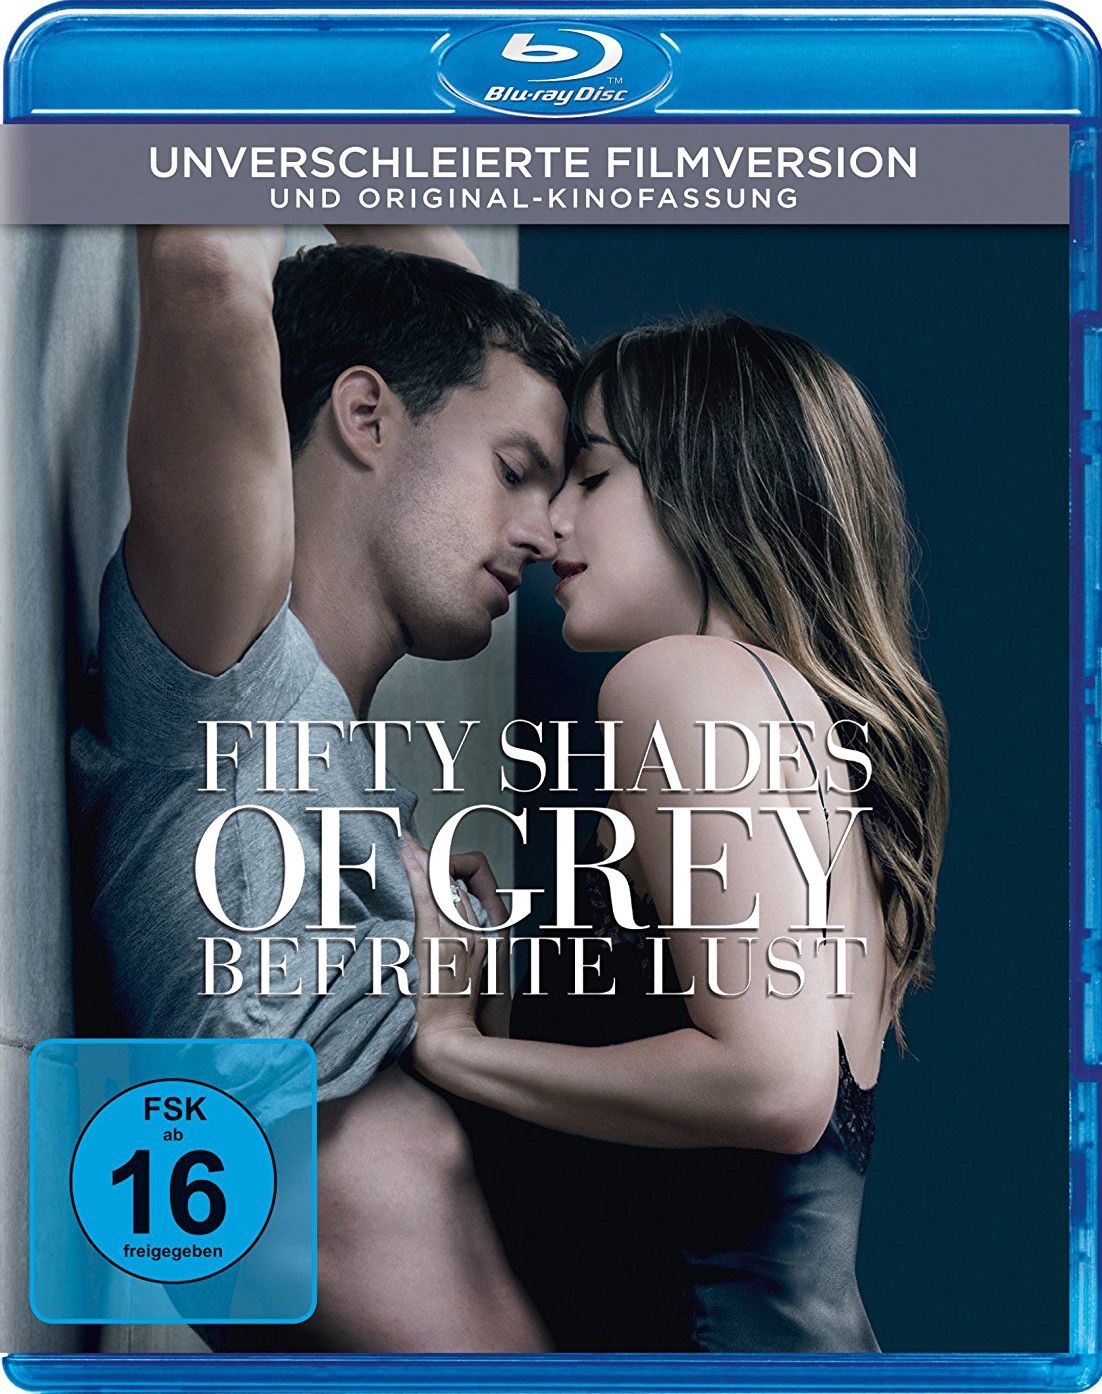 Fifty Shades of Grey - Befreite Lust (BLURAY)